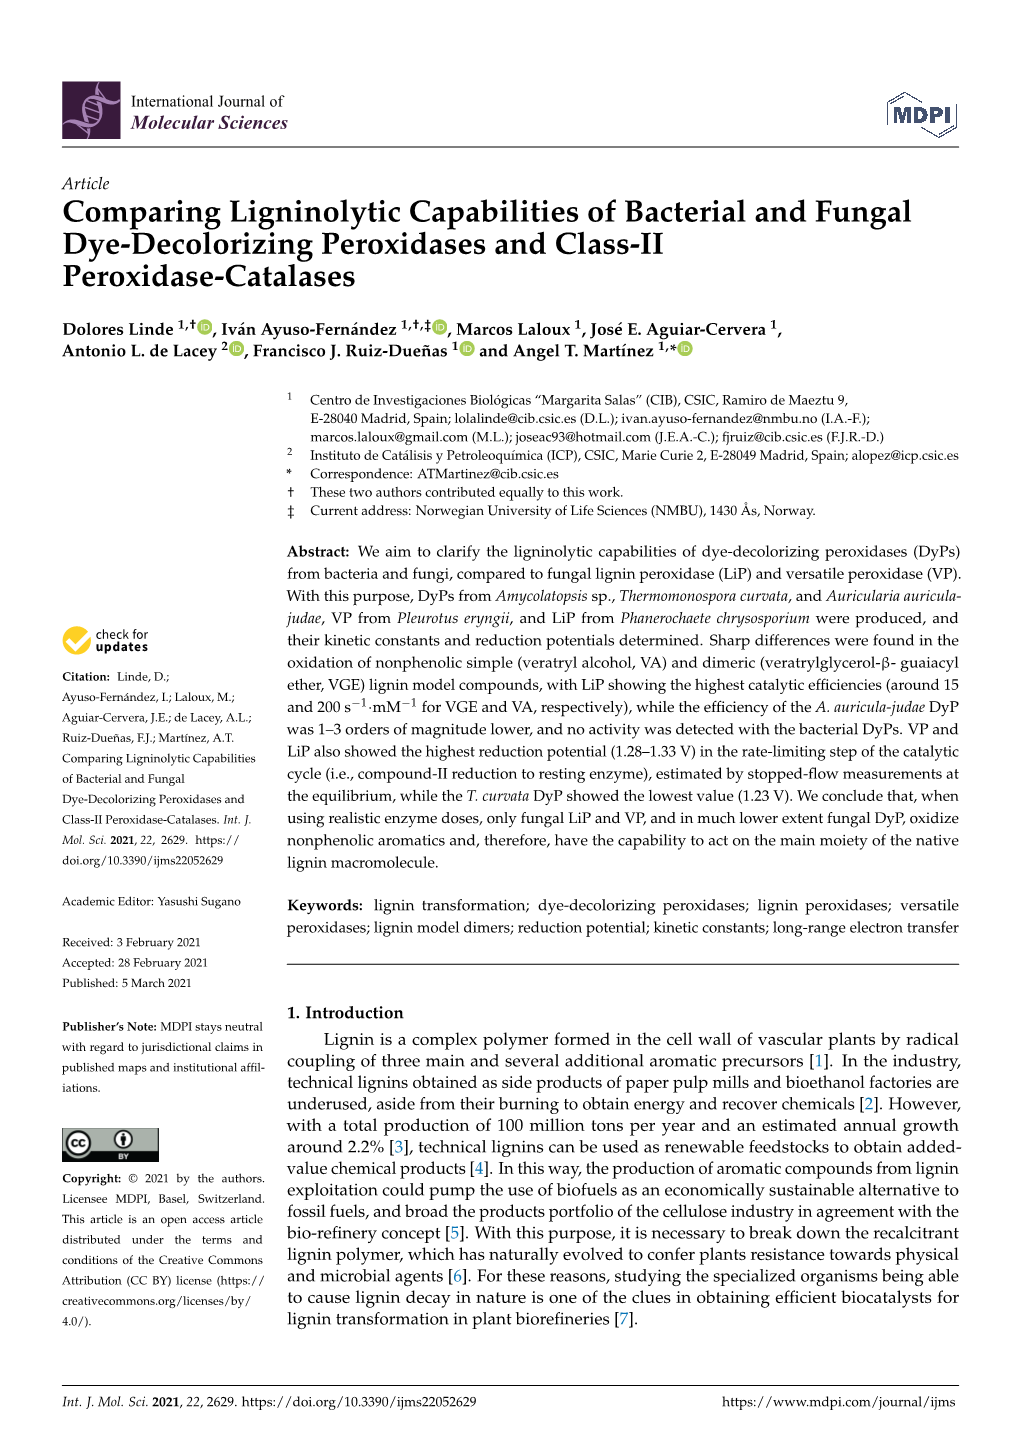 Comparing Ligninolytic Capabilities of Bacterial and Fungal Dye-Decolorizing Peroxidases and Class-II Peroxidase-Catalases